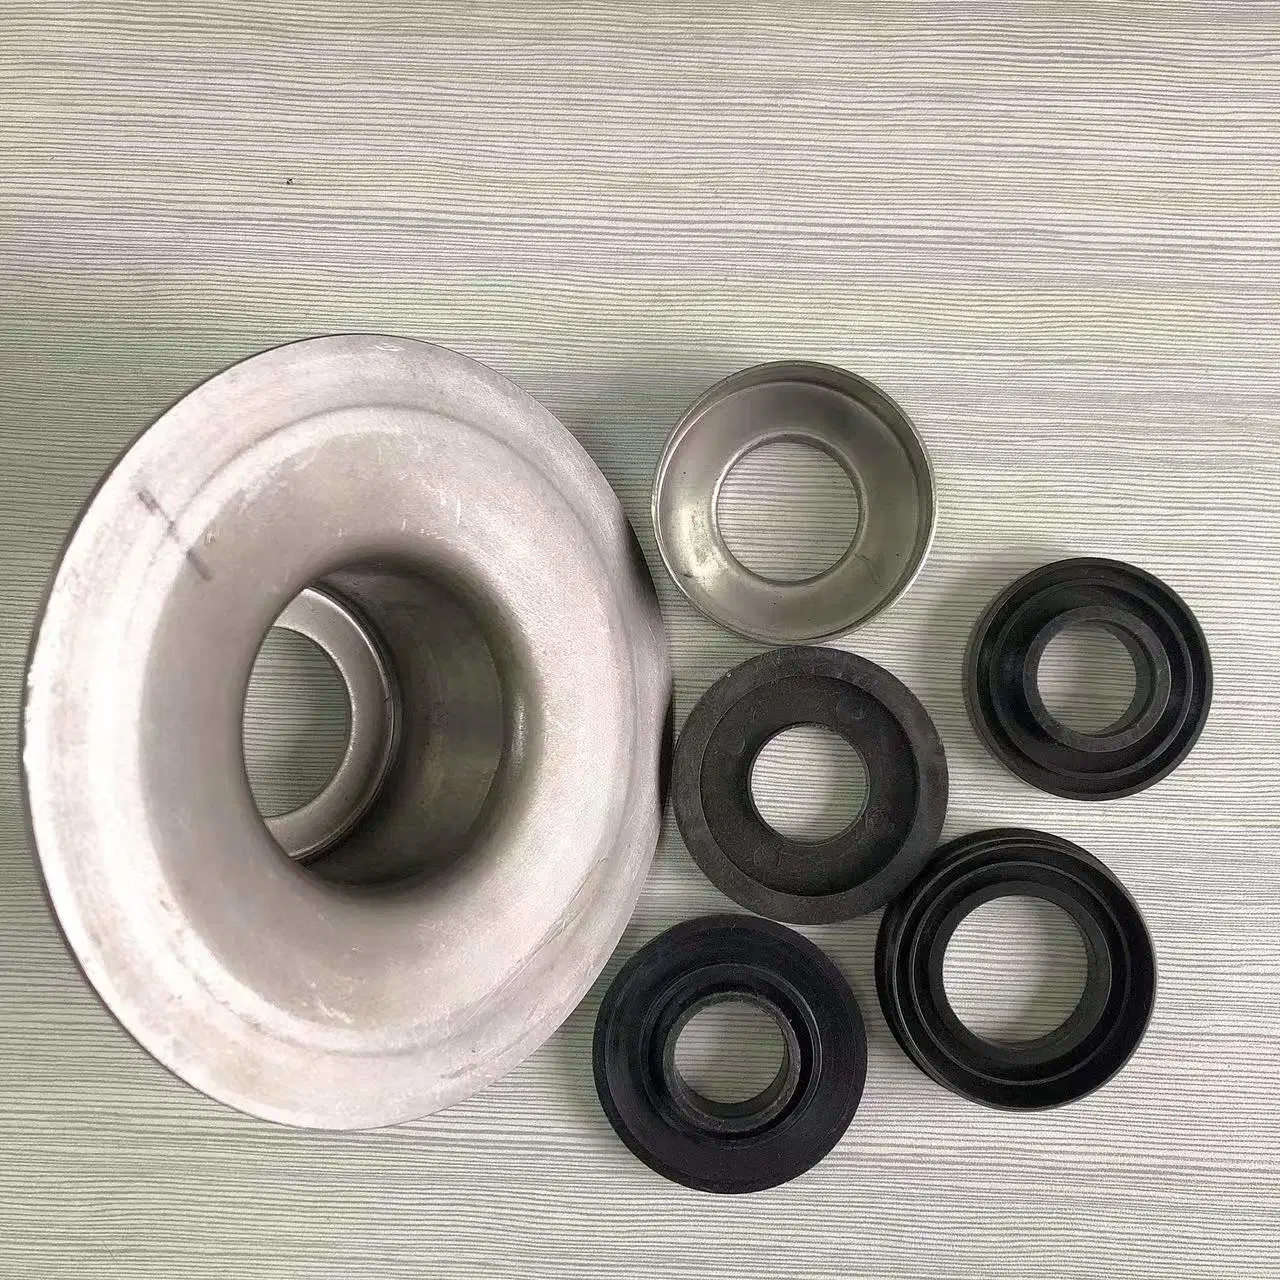 TK Series Belt Conveyor Roller Components Metal Cover Protect Shell Bearing Housing 6206-160-4